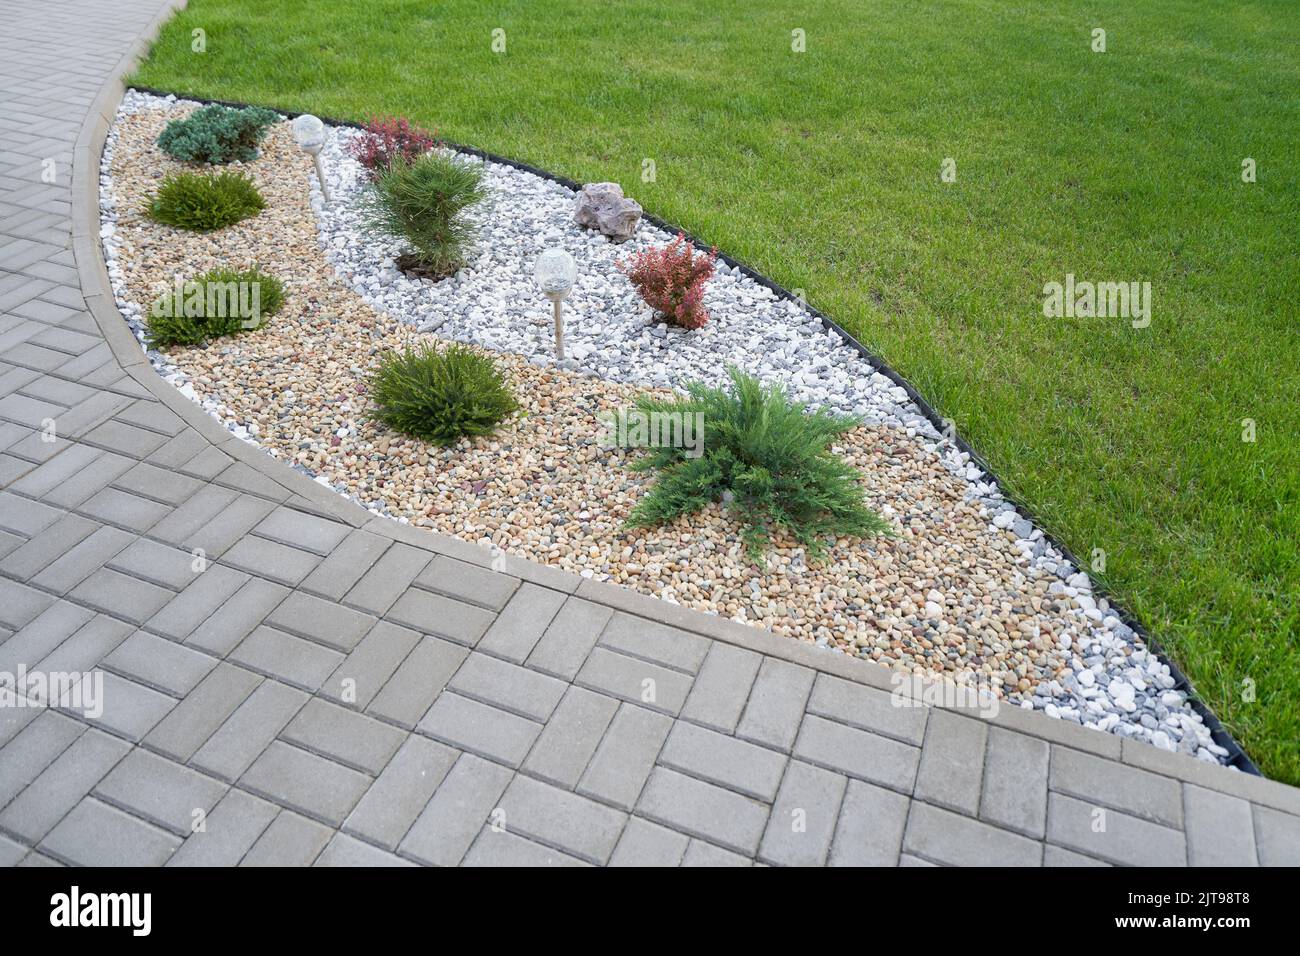 Landscaping in the garden with stones and coniferous bushes of Thuja along a pavement Stock Photo